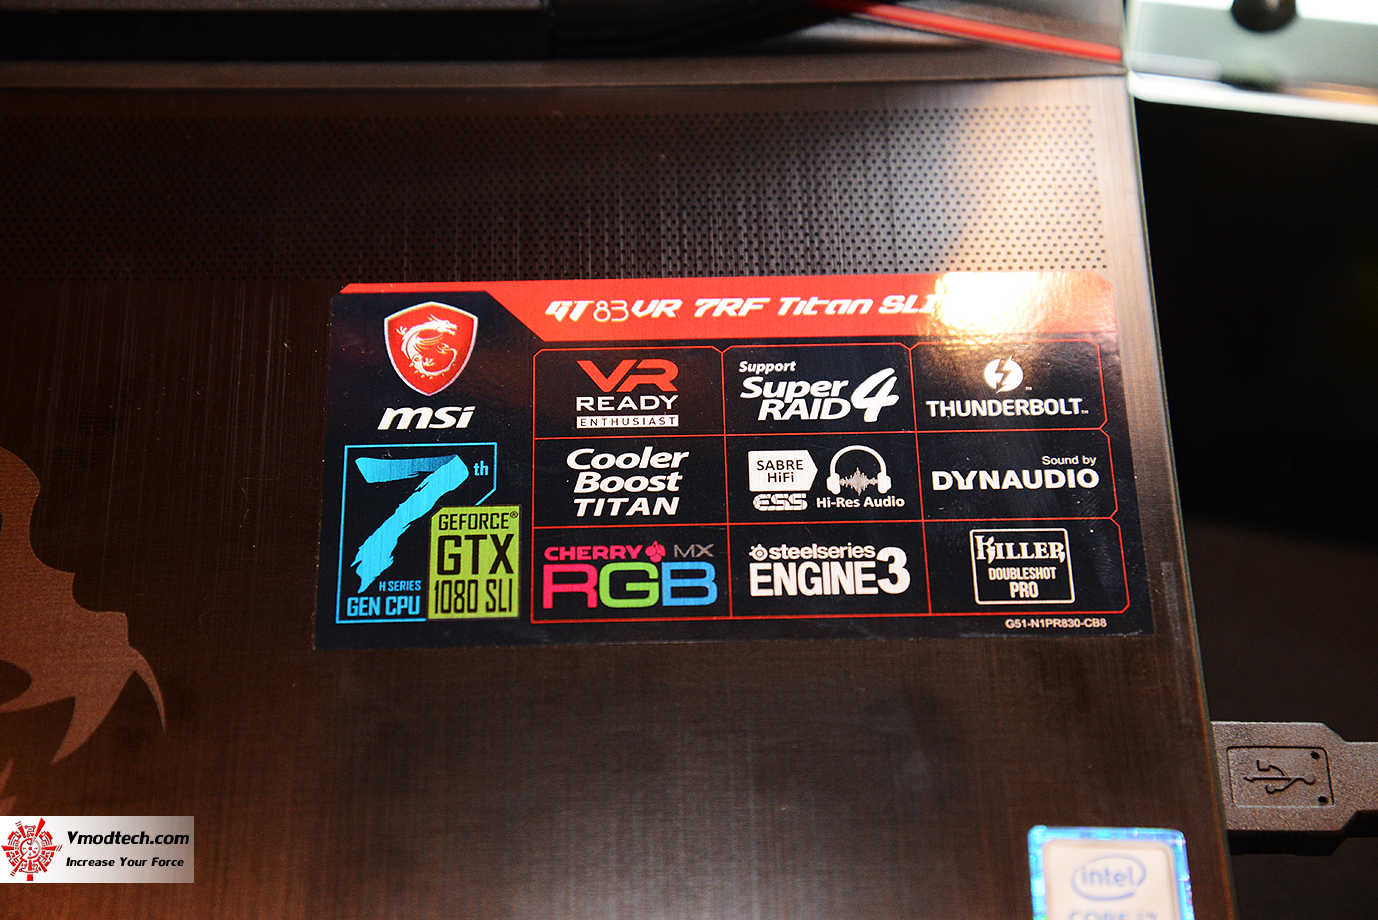 dsc 1493 MSI GAMING NOTEBOOK CES2017 LAS VEGAS PREVIEW